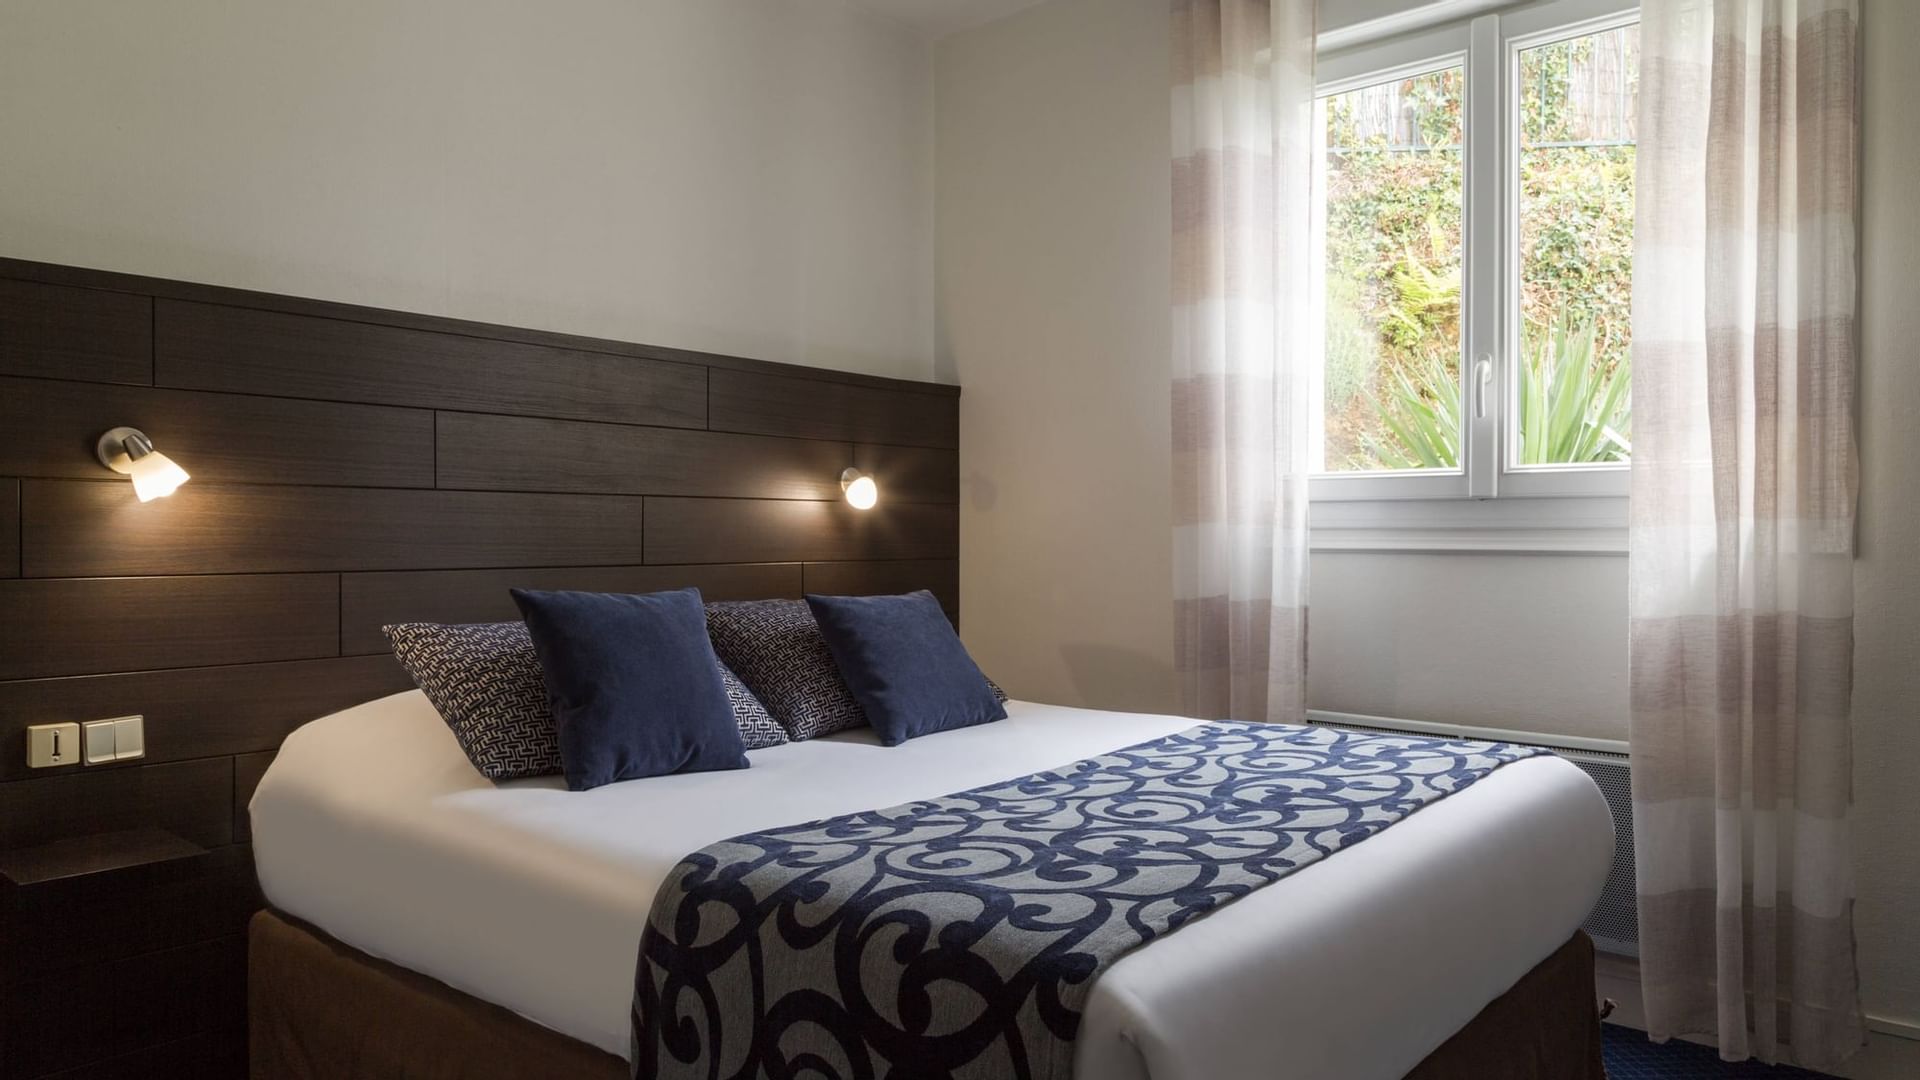 A comfy bed by a window in a bedroom at Originals Hotels